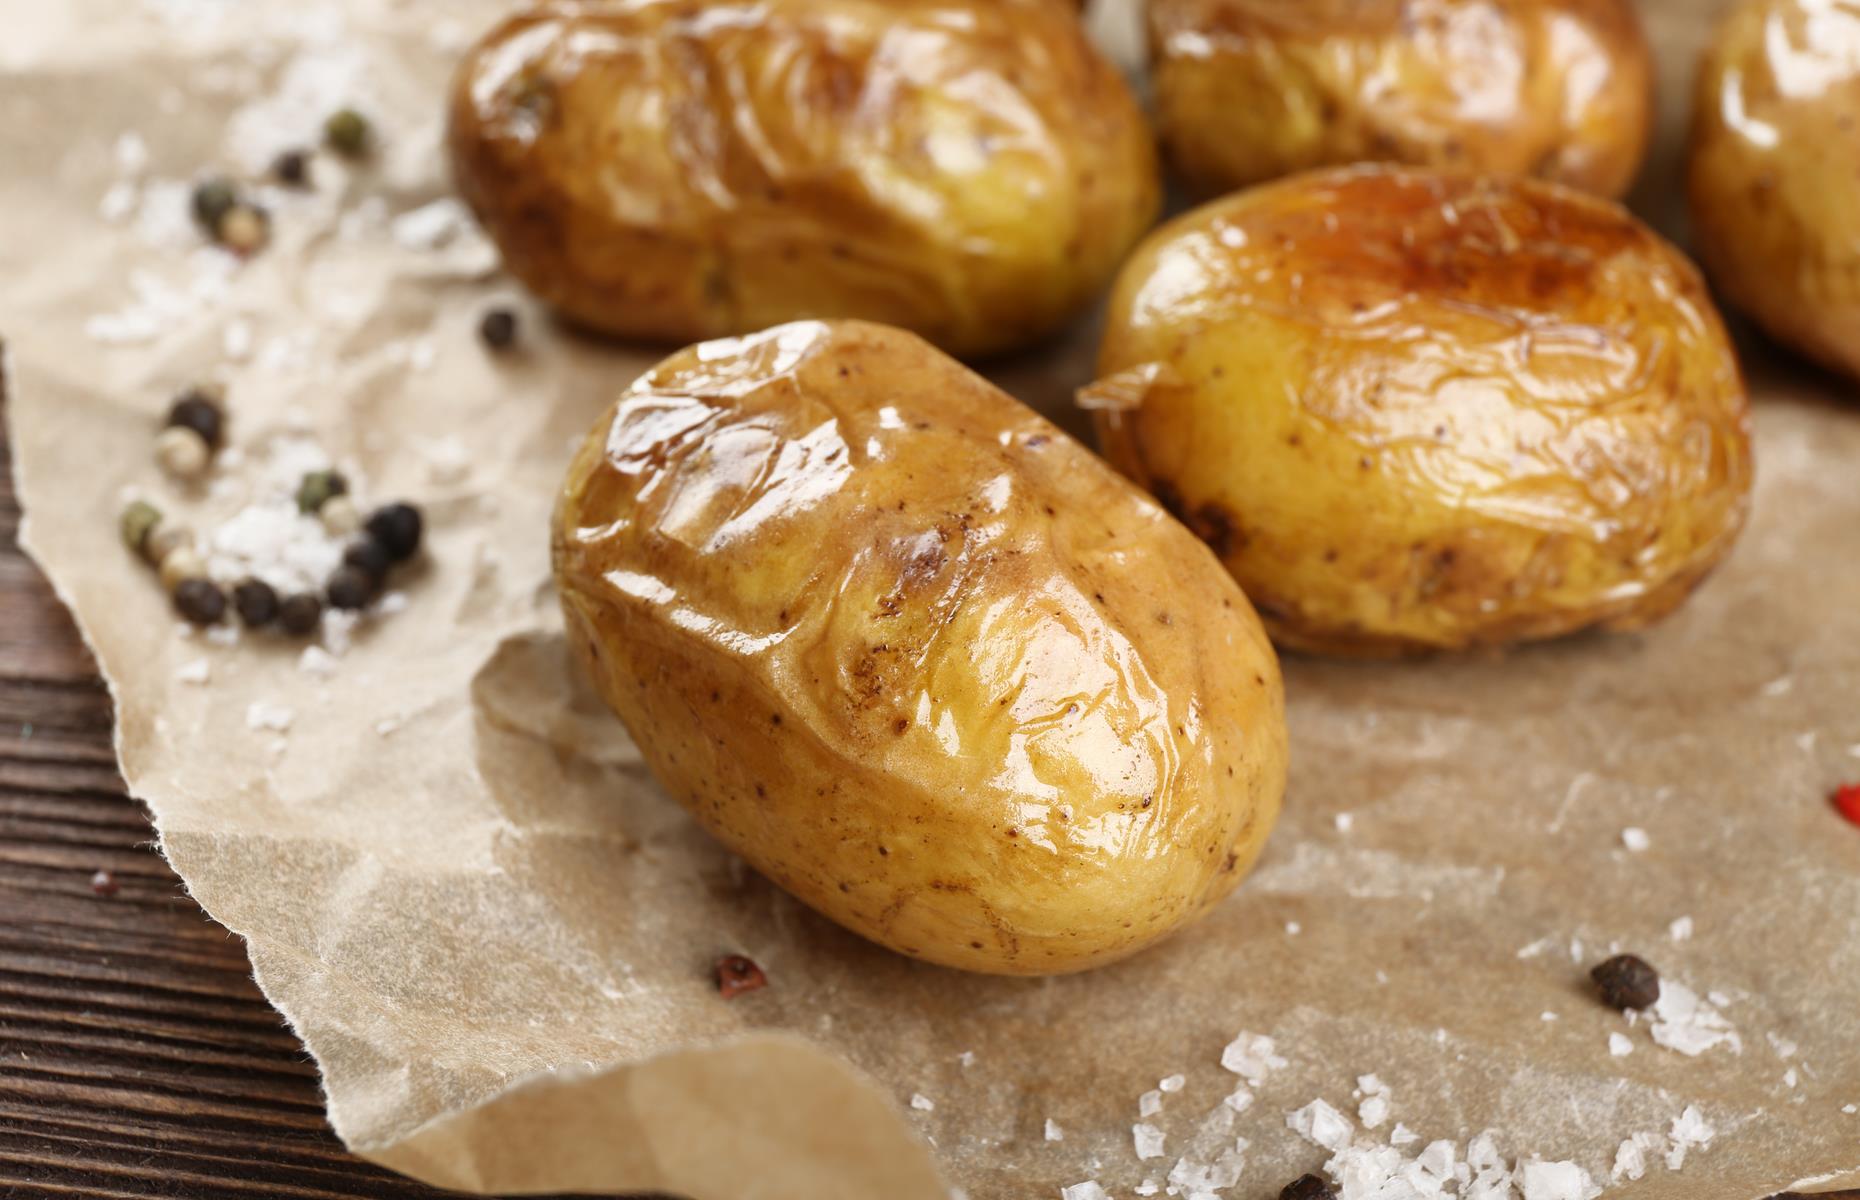 Pre-bake potatoes that can be reheated in the microwave